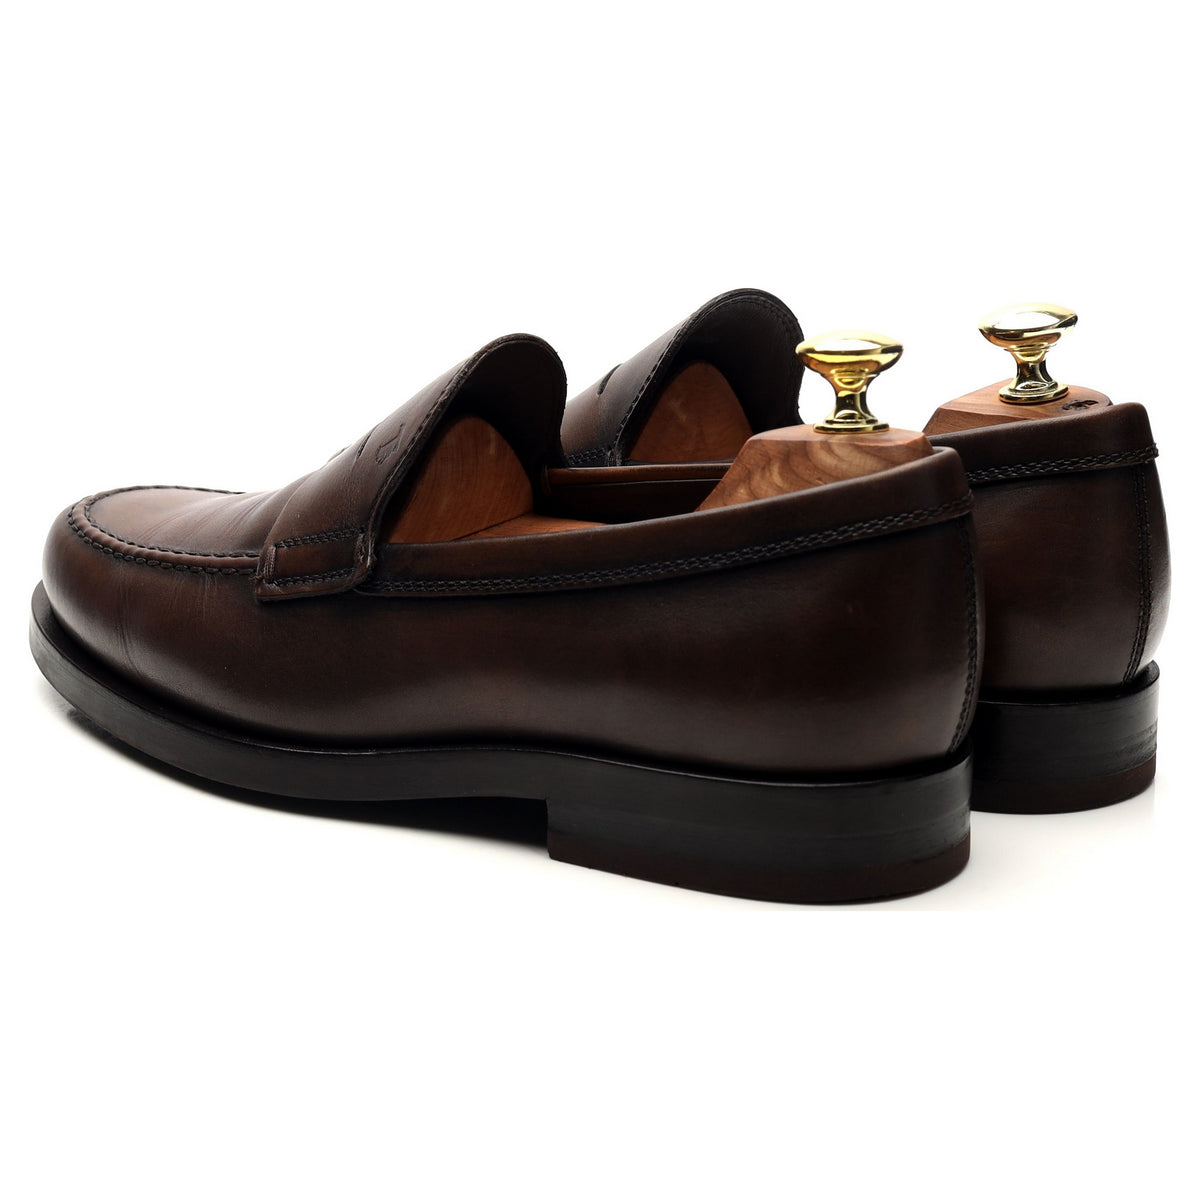 Dark Brown Leather Loafers UK 7